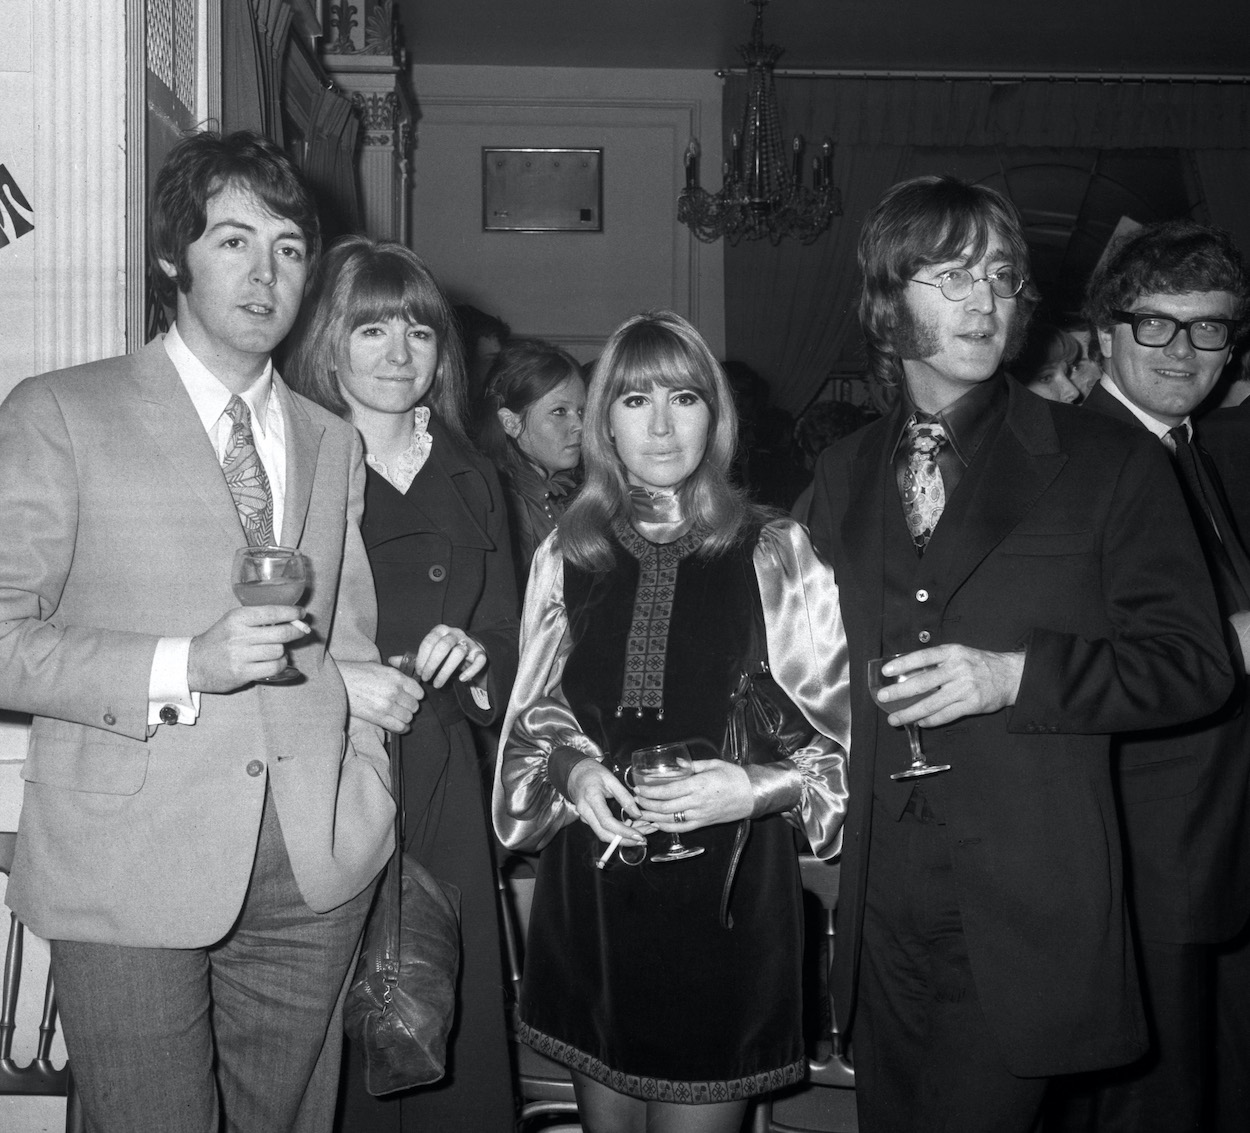 (l-r) Paul McCartney, Jane Asher, Cynthia Lennon, and John Lennon. McCartney knew John's marriage to Cynthia wouldn't last because of one comment she made to him.